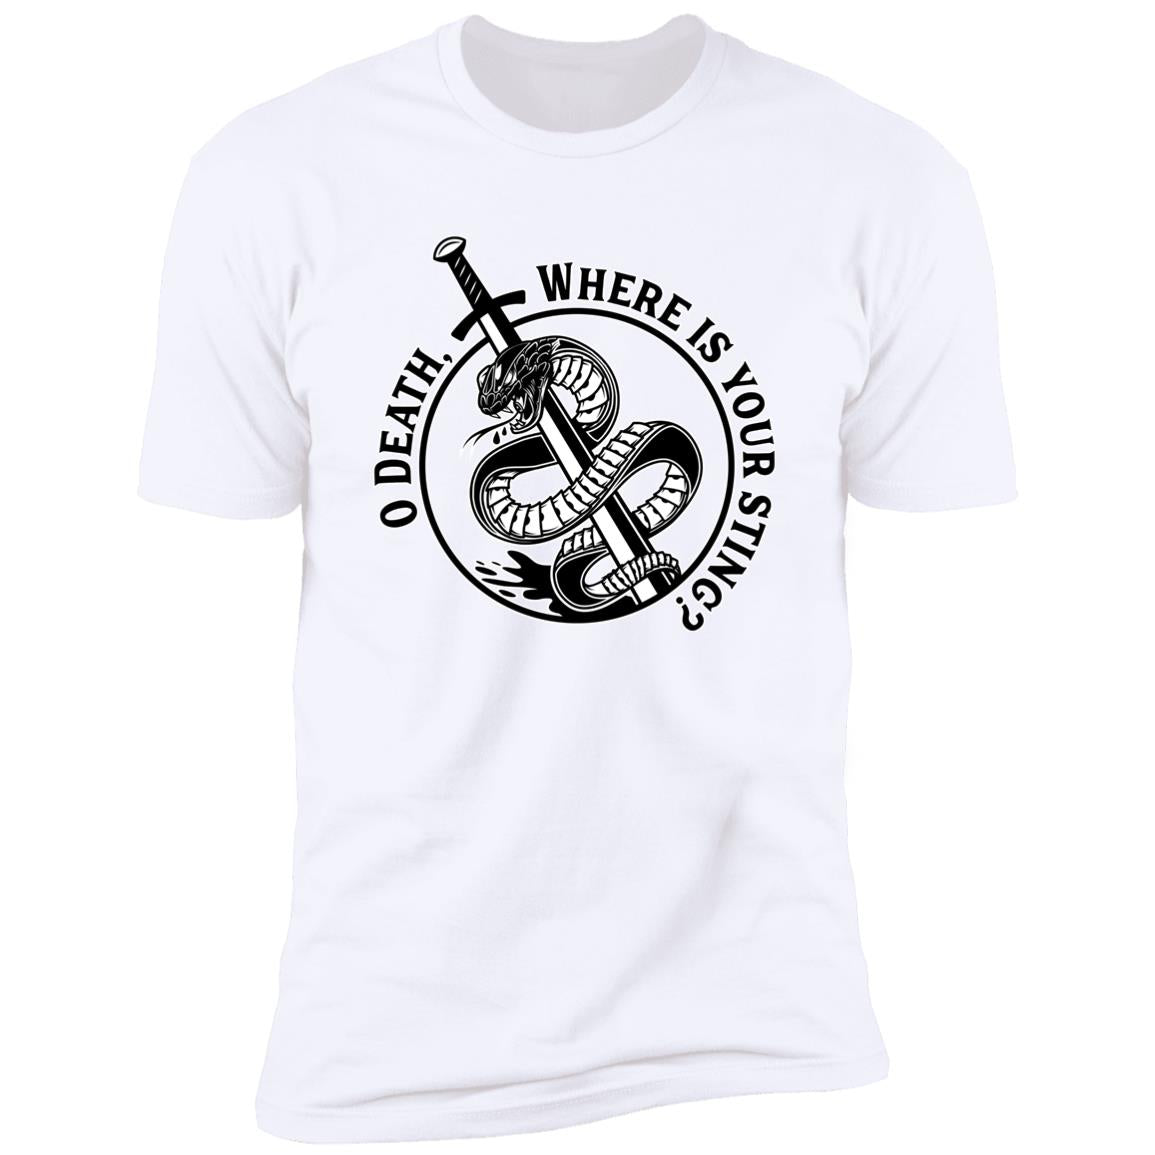 Where is Your Sting? (Unisex Tee)